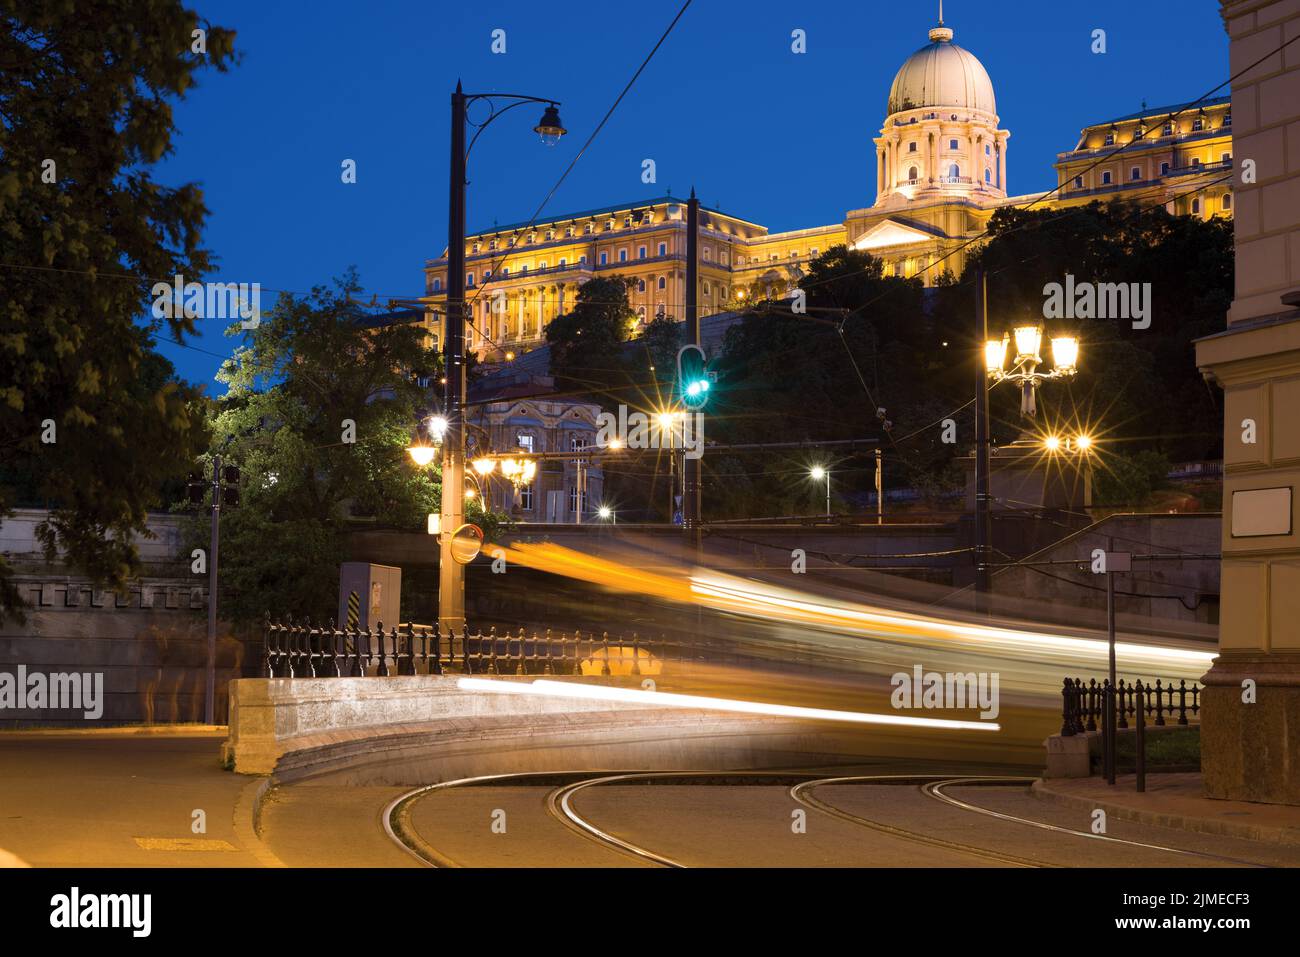 Light trail on a tram turn against Royal Palace Building at night Stock Photo